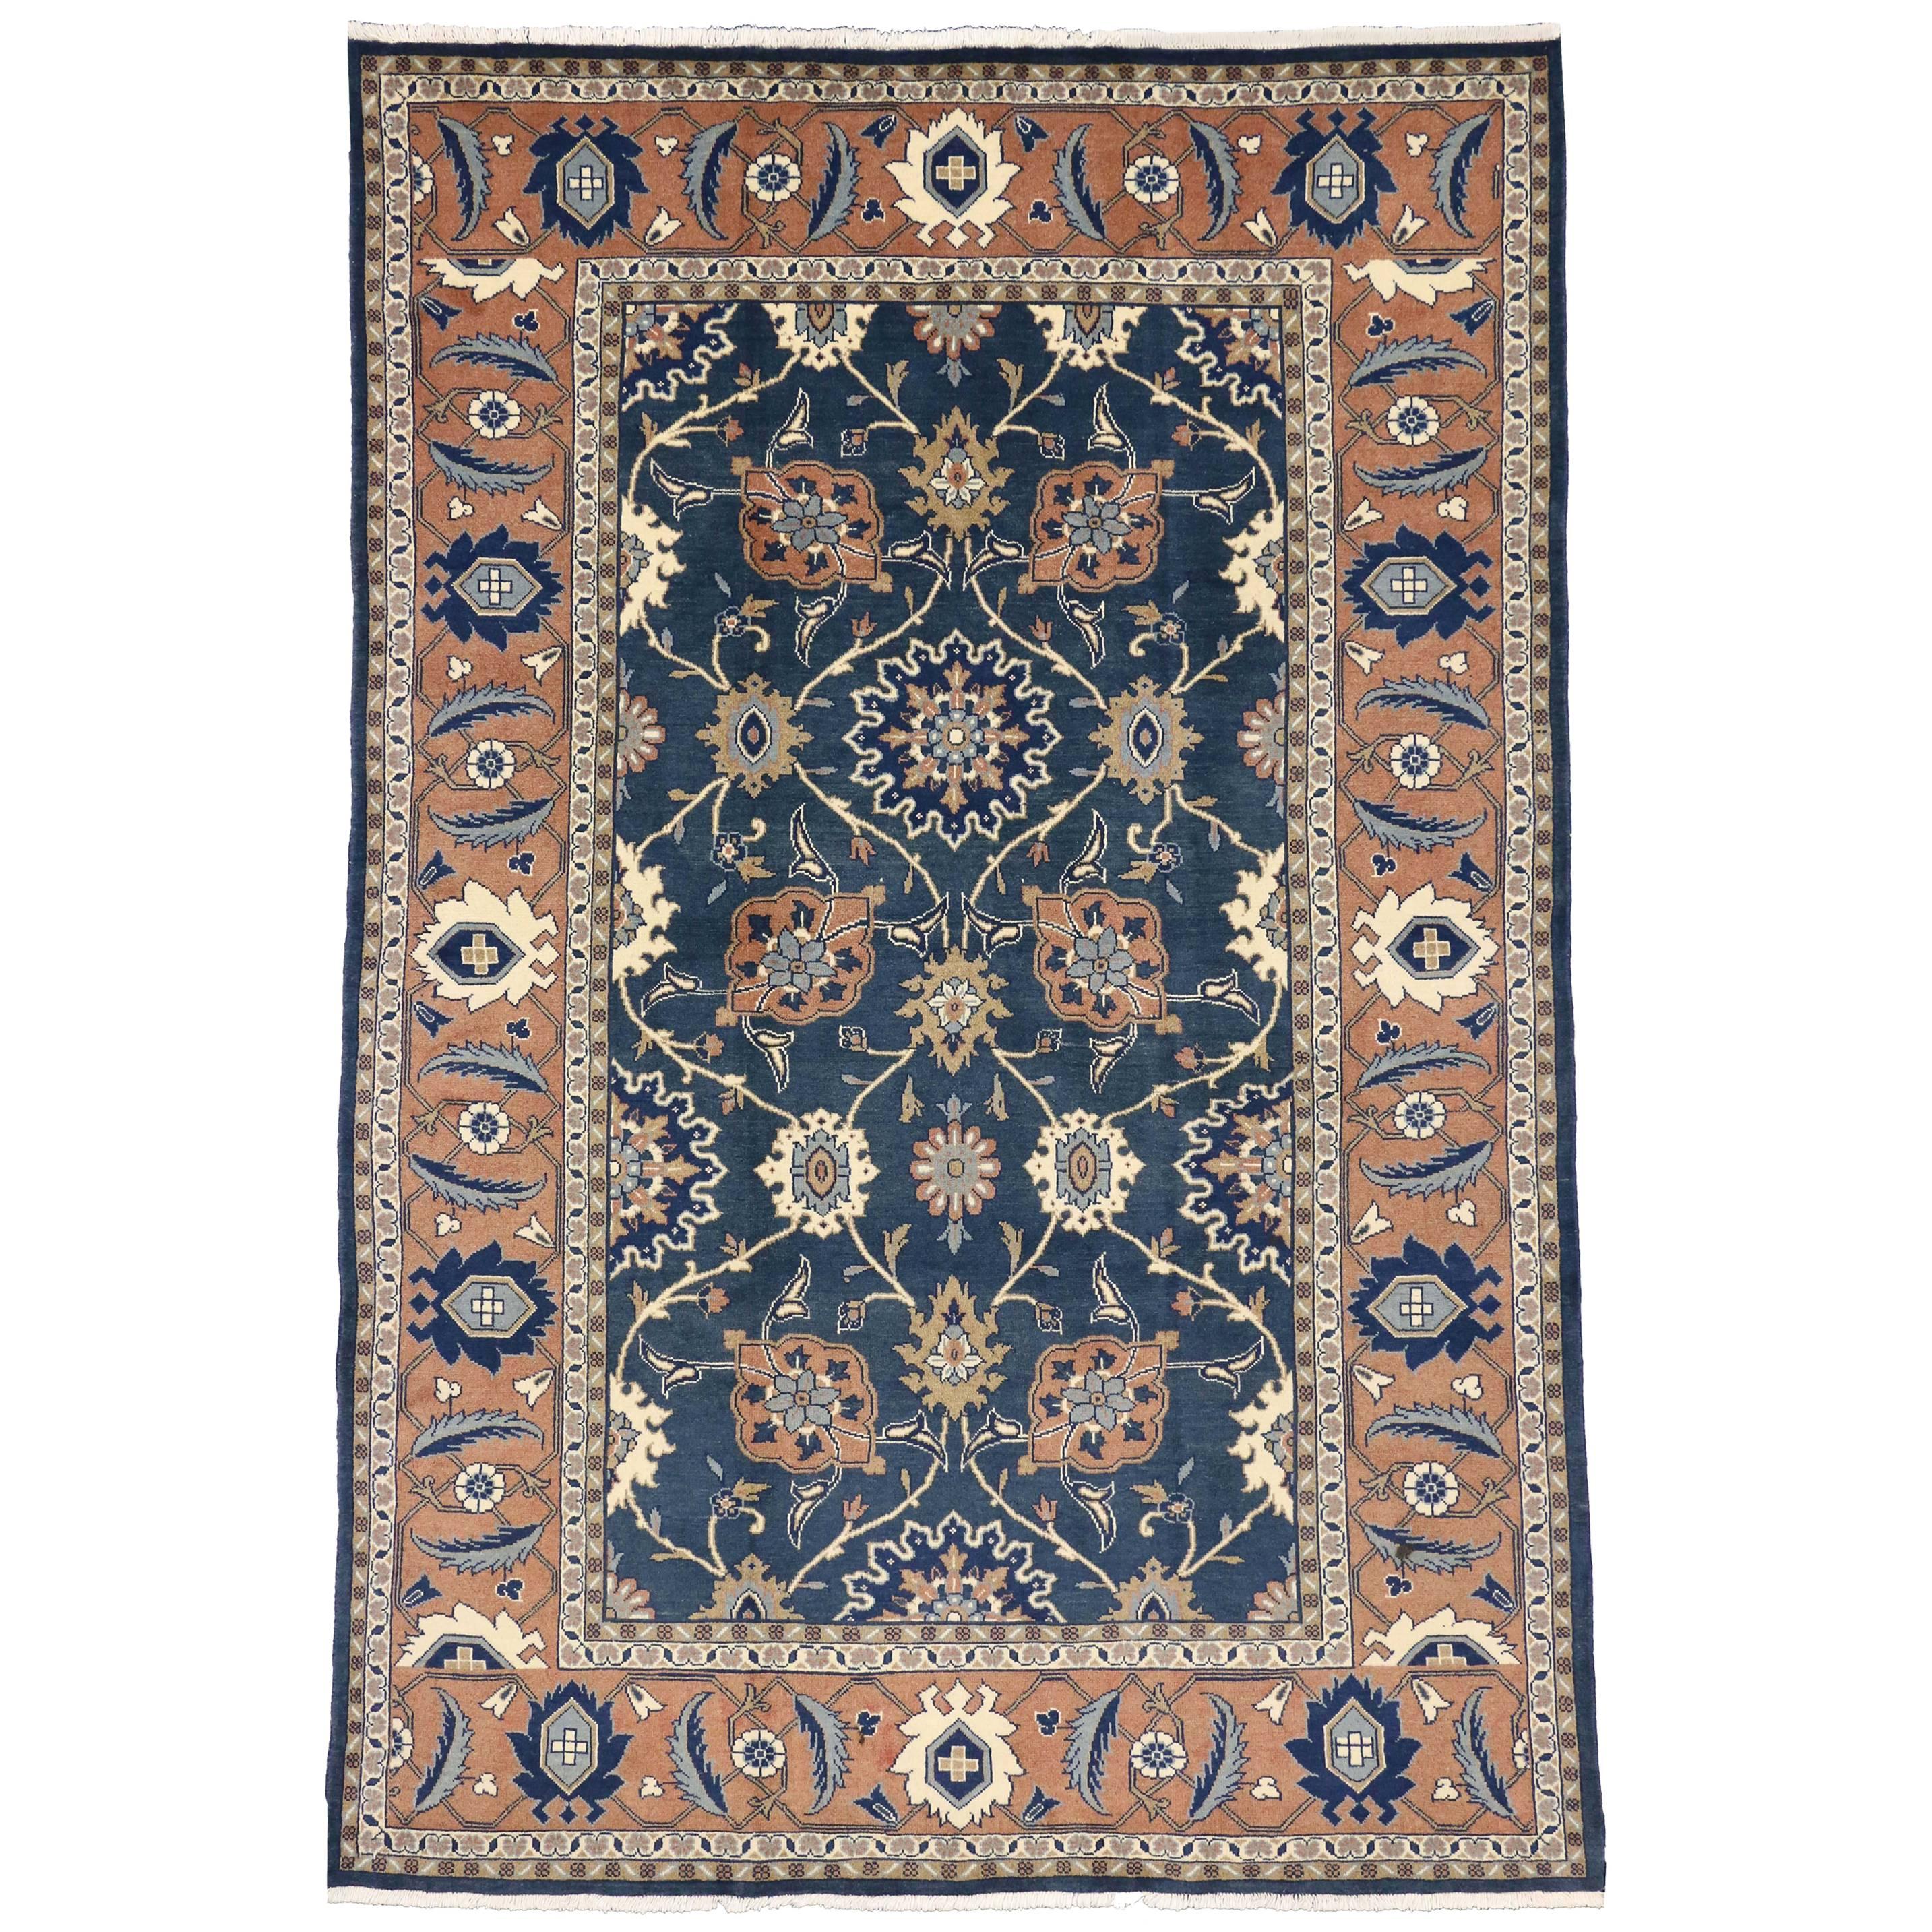 Vintage Persian Mahal Rug with Mina Khani Pattern and Spanish Revival Style